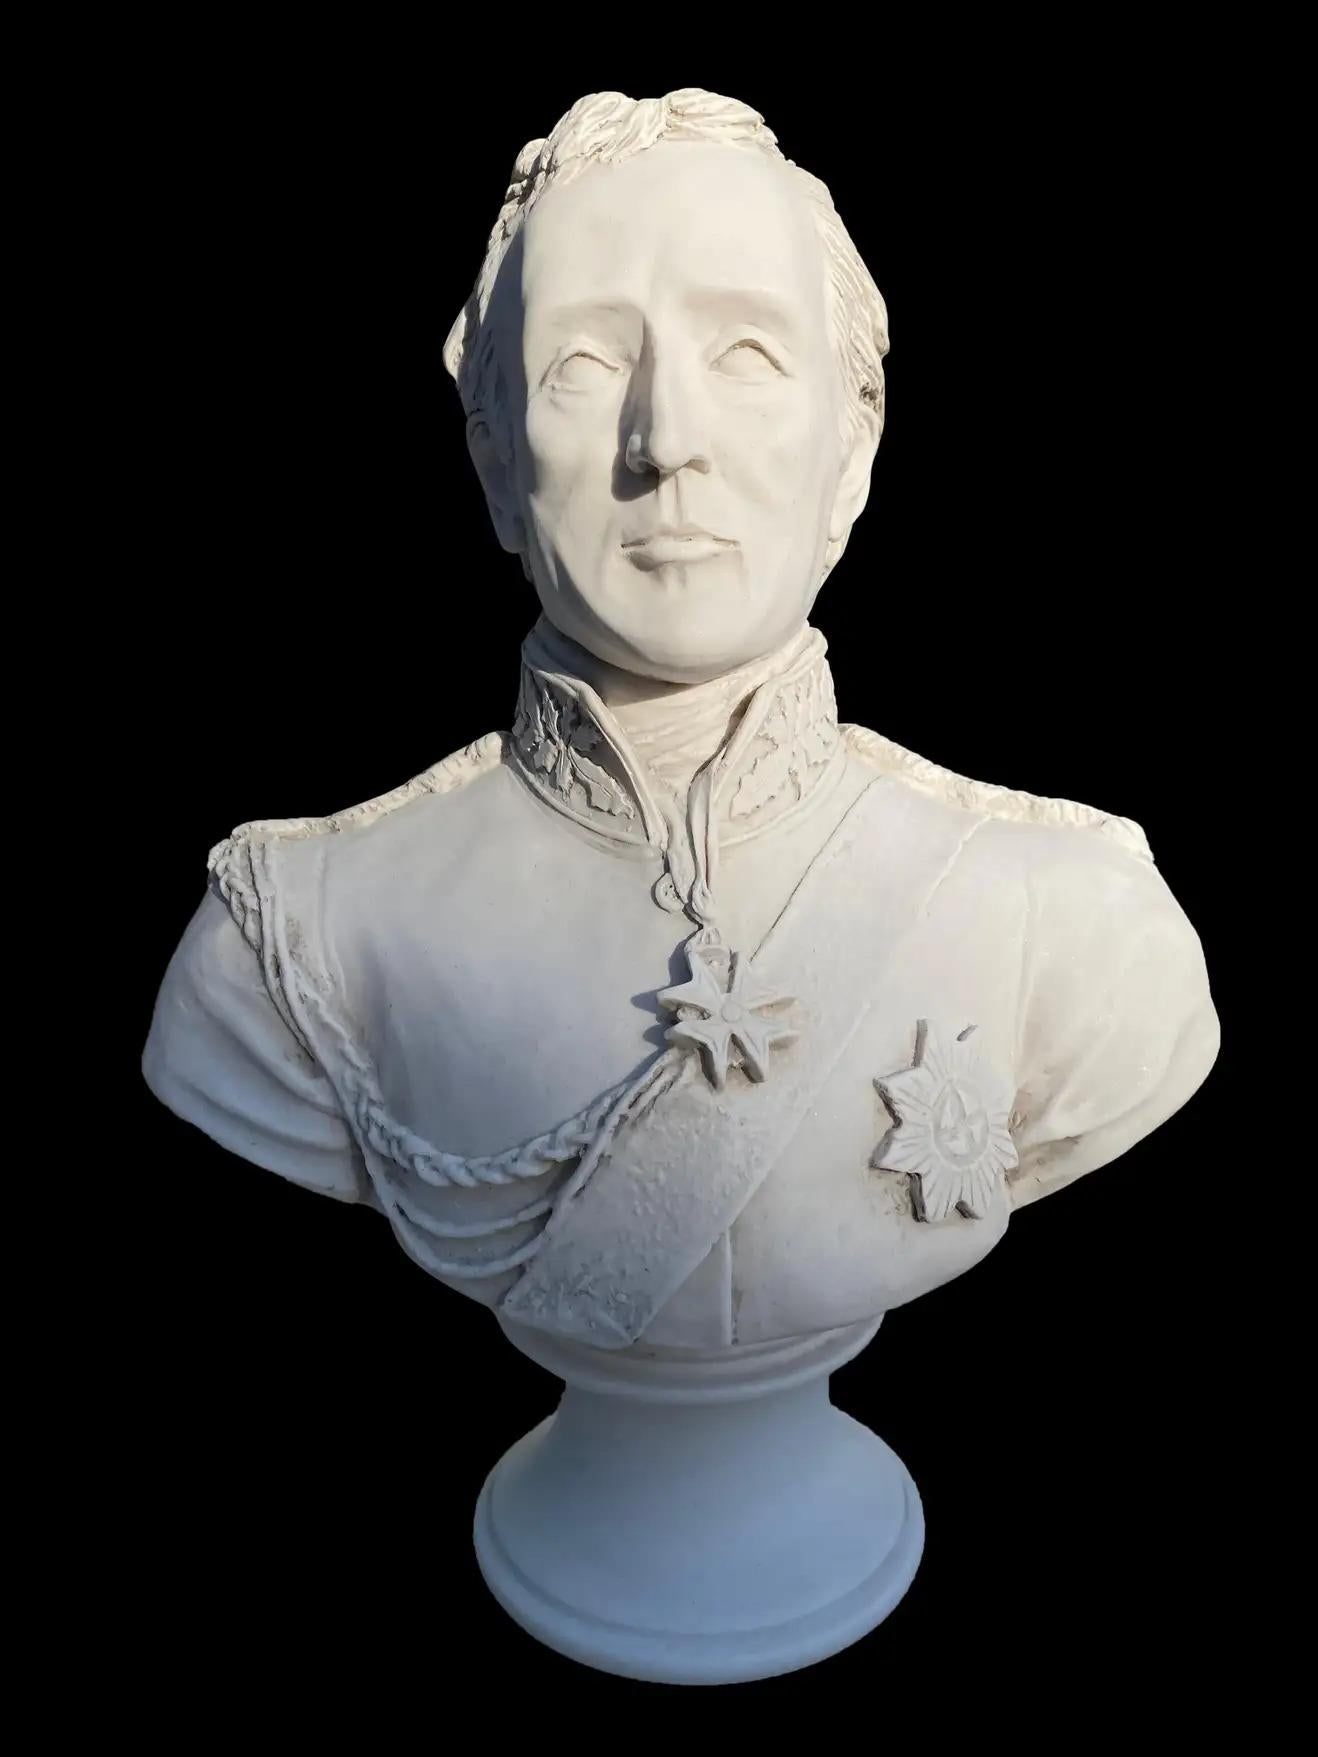 A stunning Arthur Wellesley, 1st Duke of Wellington bust sculpture, 20th century.

Arthur Wellesley, 1st Duke of Wellington, KG, GCB, GCH, PC, FRS (1 May 1769 – 14 September 1852) was an Anglo-Irish soldier and Tory statesman who was one of the